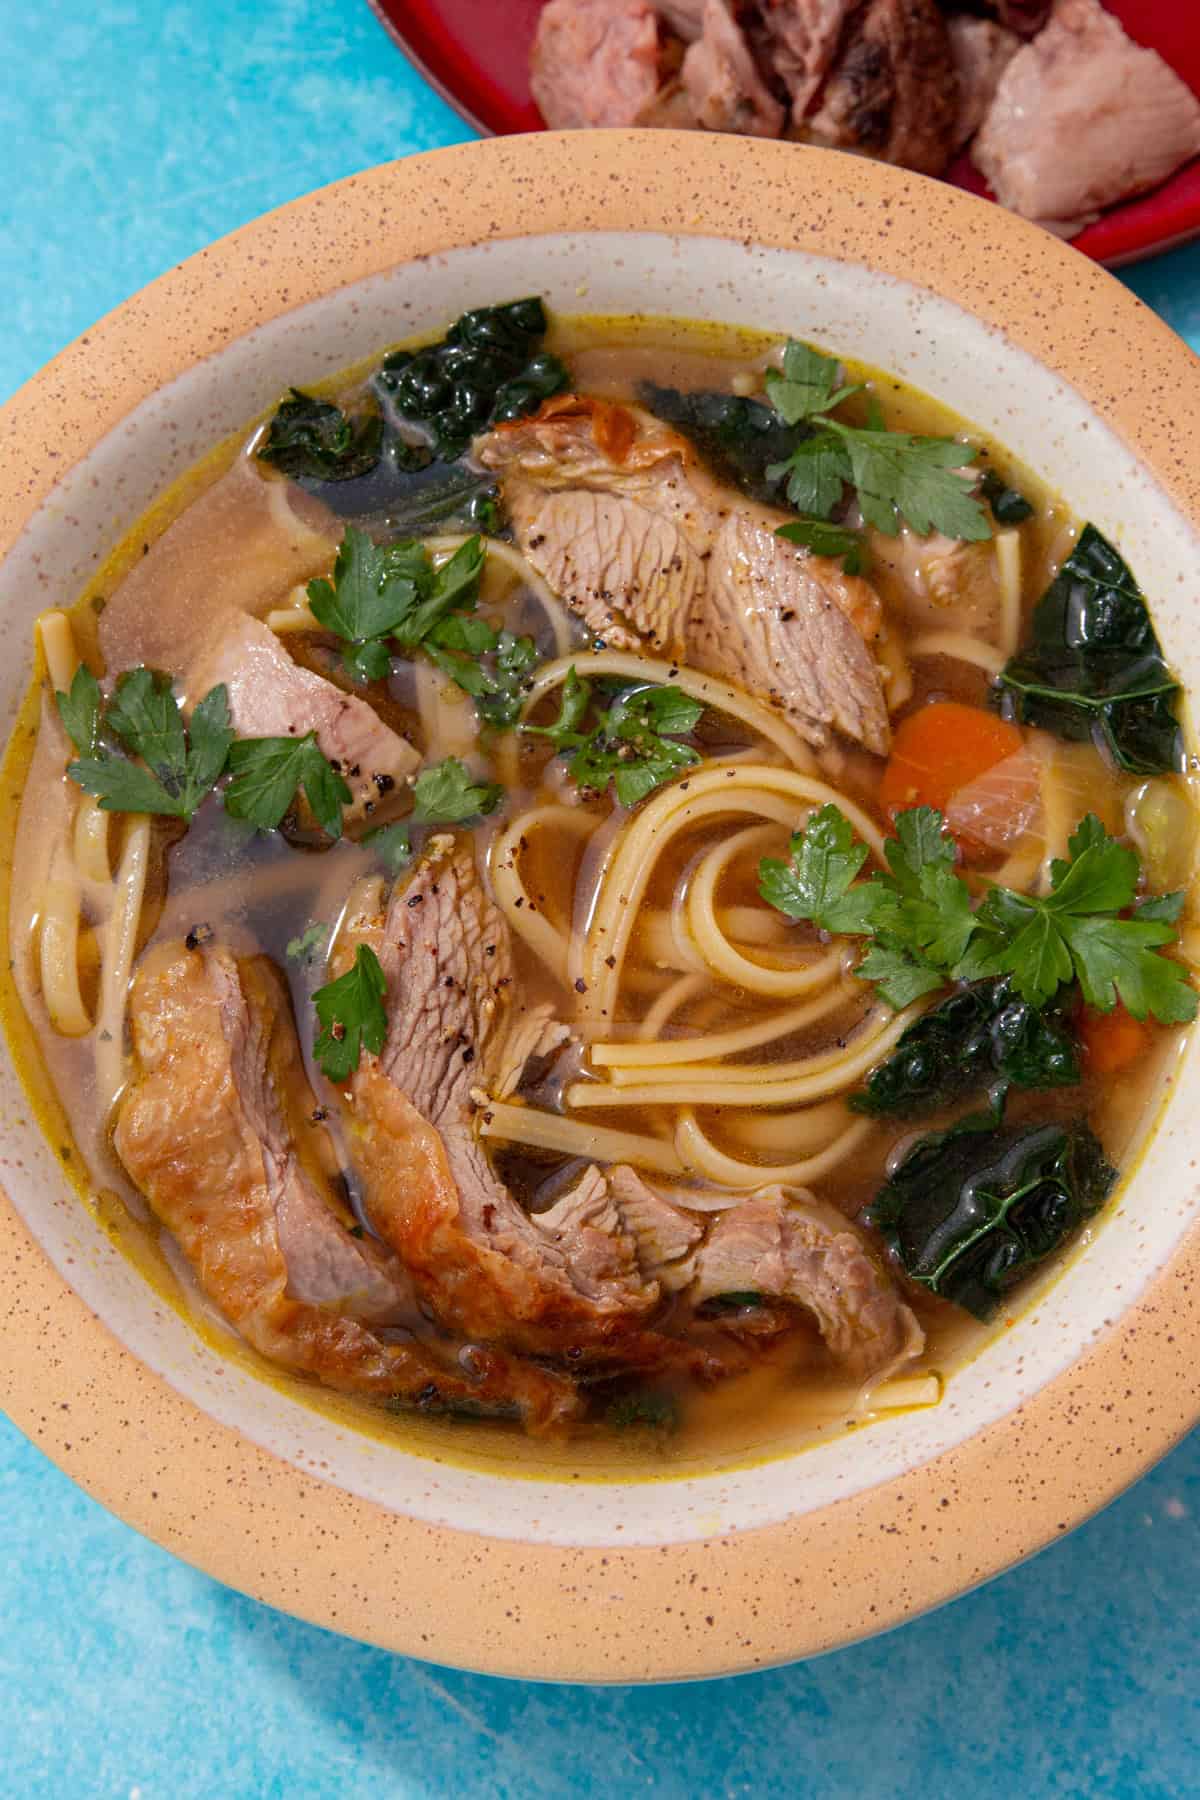 A bowl of soup with noodles, turkey, cavolo nero, carrot and some parsley with the turkey on a plate in partial view.